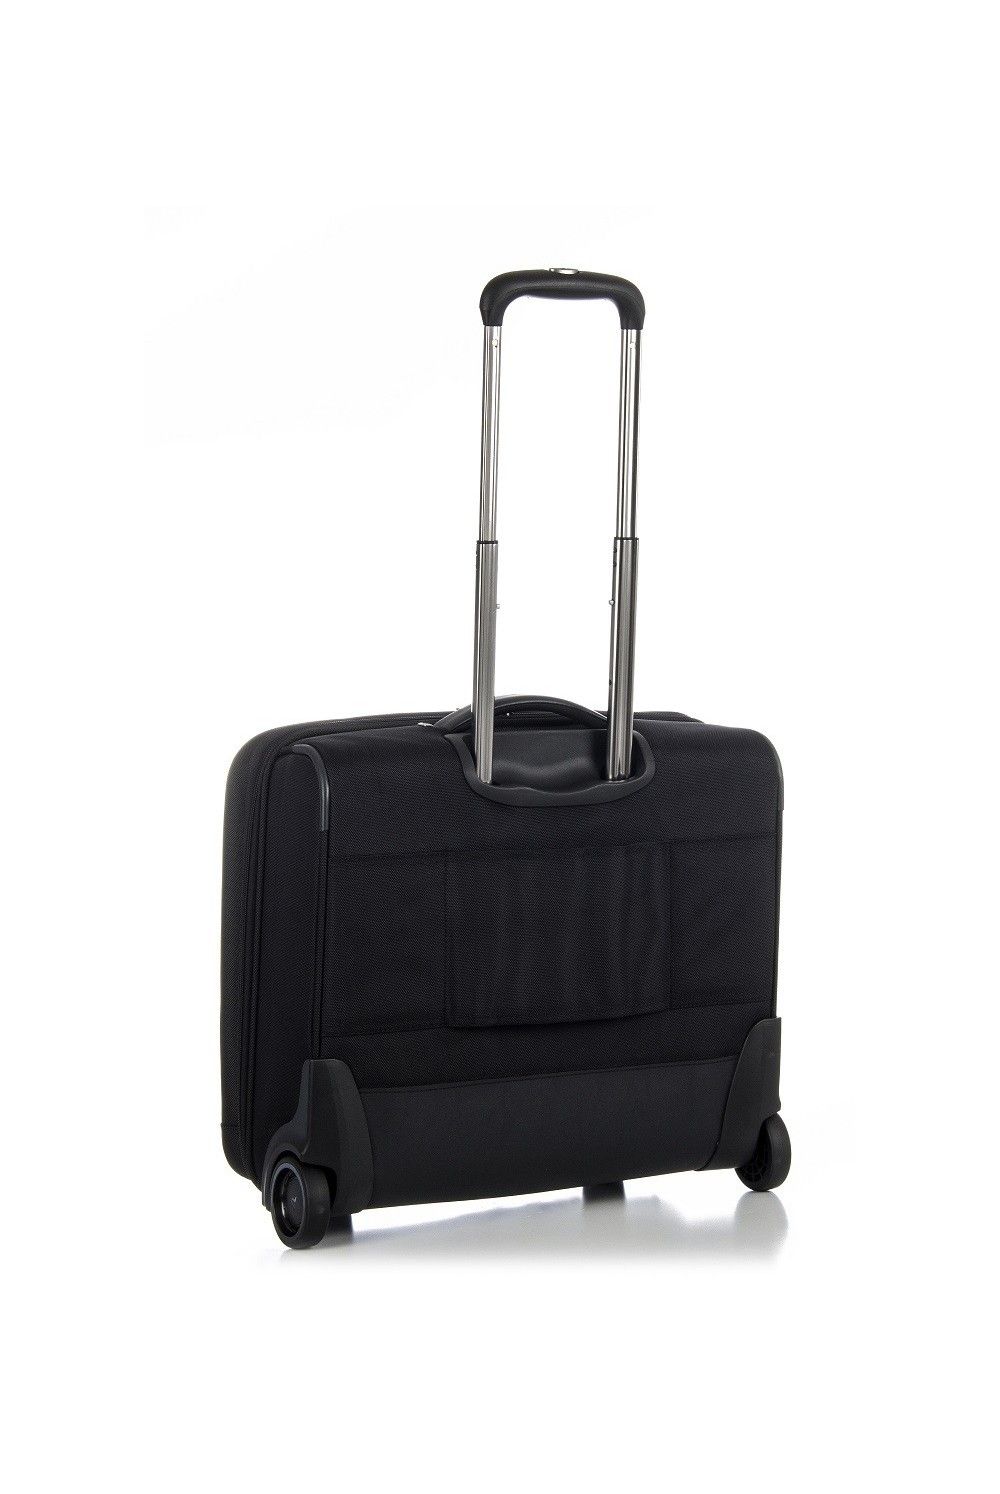 Roncato business trolley 17 inch 1 compartment 2 wheels